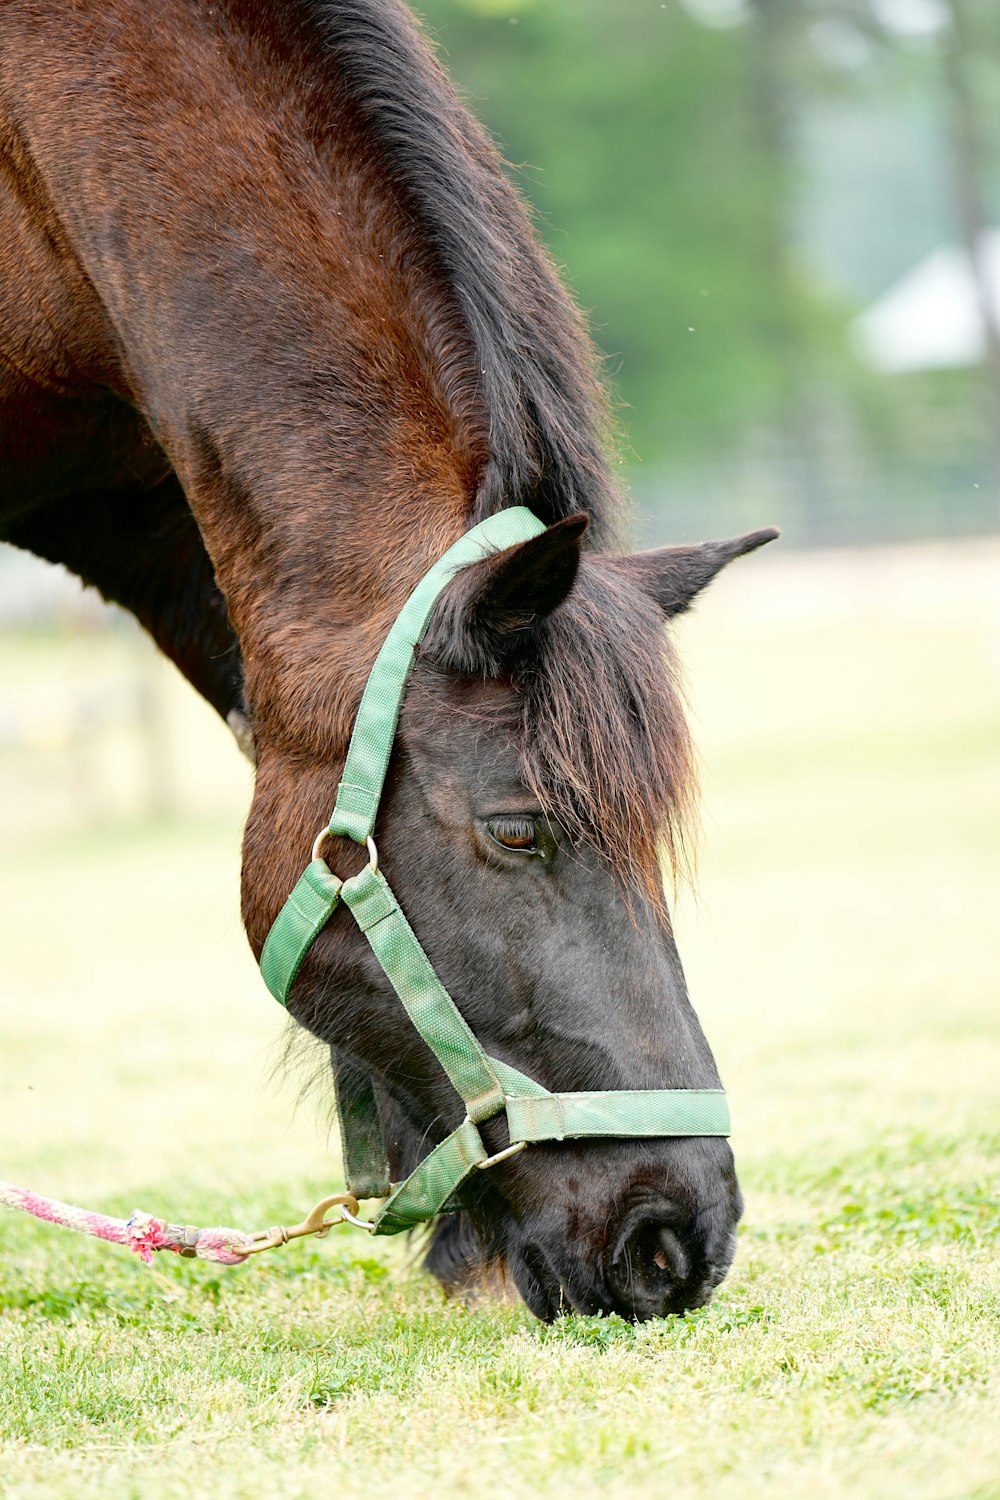 a brown horse with a green bridle grazing on grass